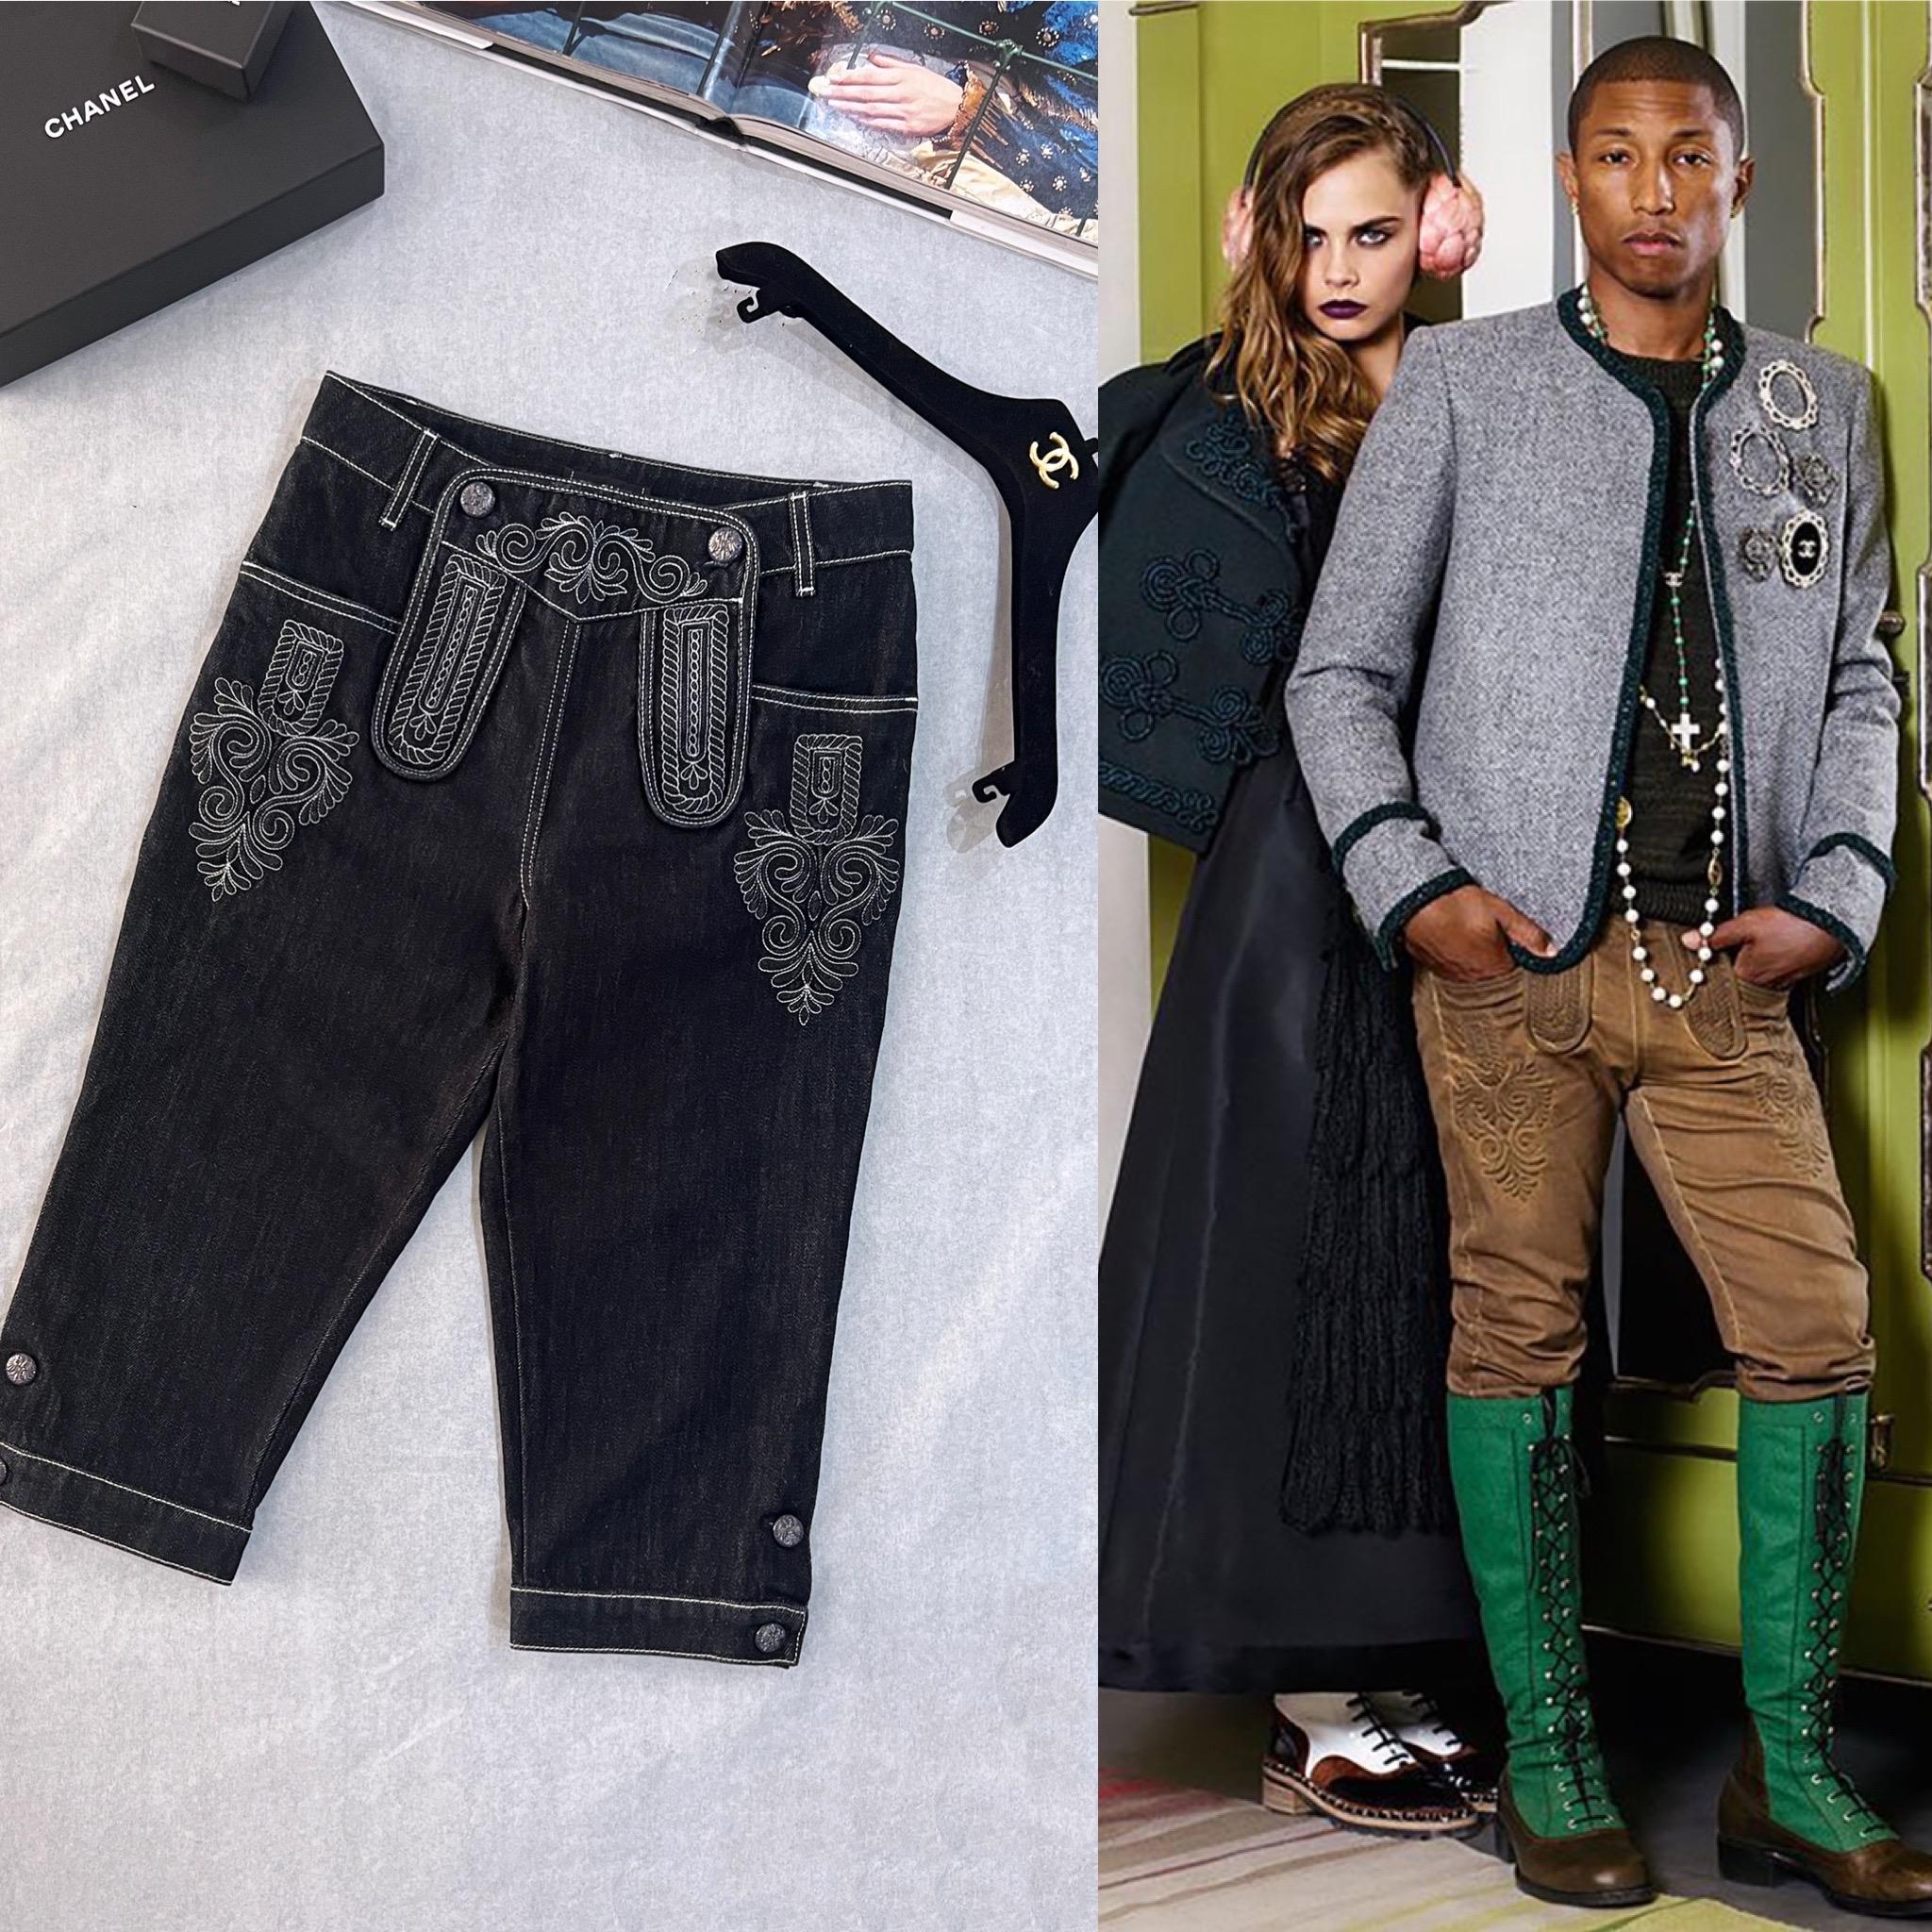 New dark navy cropped jeans from Paris / SALZBURG Metiers d'Art Collection, 2015 Pre-Fall. As seen on Pharrell Williams in Ad Campaign, 15A
- made of dark navy denim with embroidered Tyrolean motifs 
- stunning CC logo buttons with eagles
Size mark